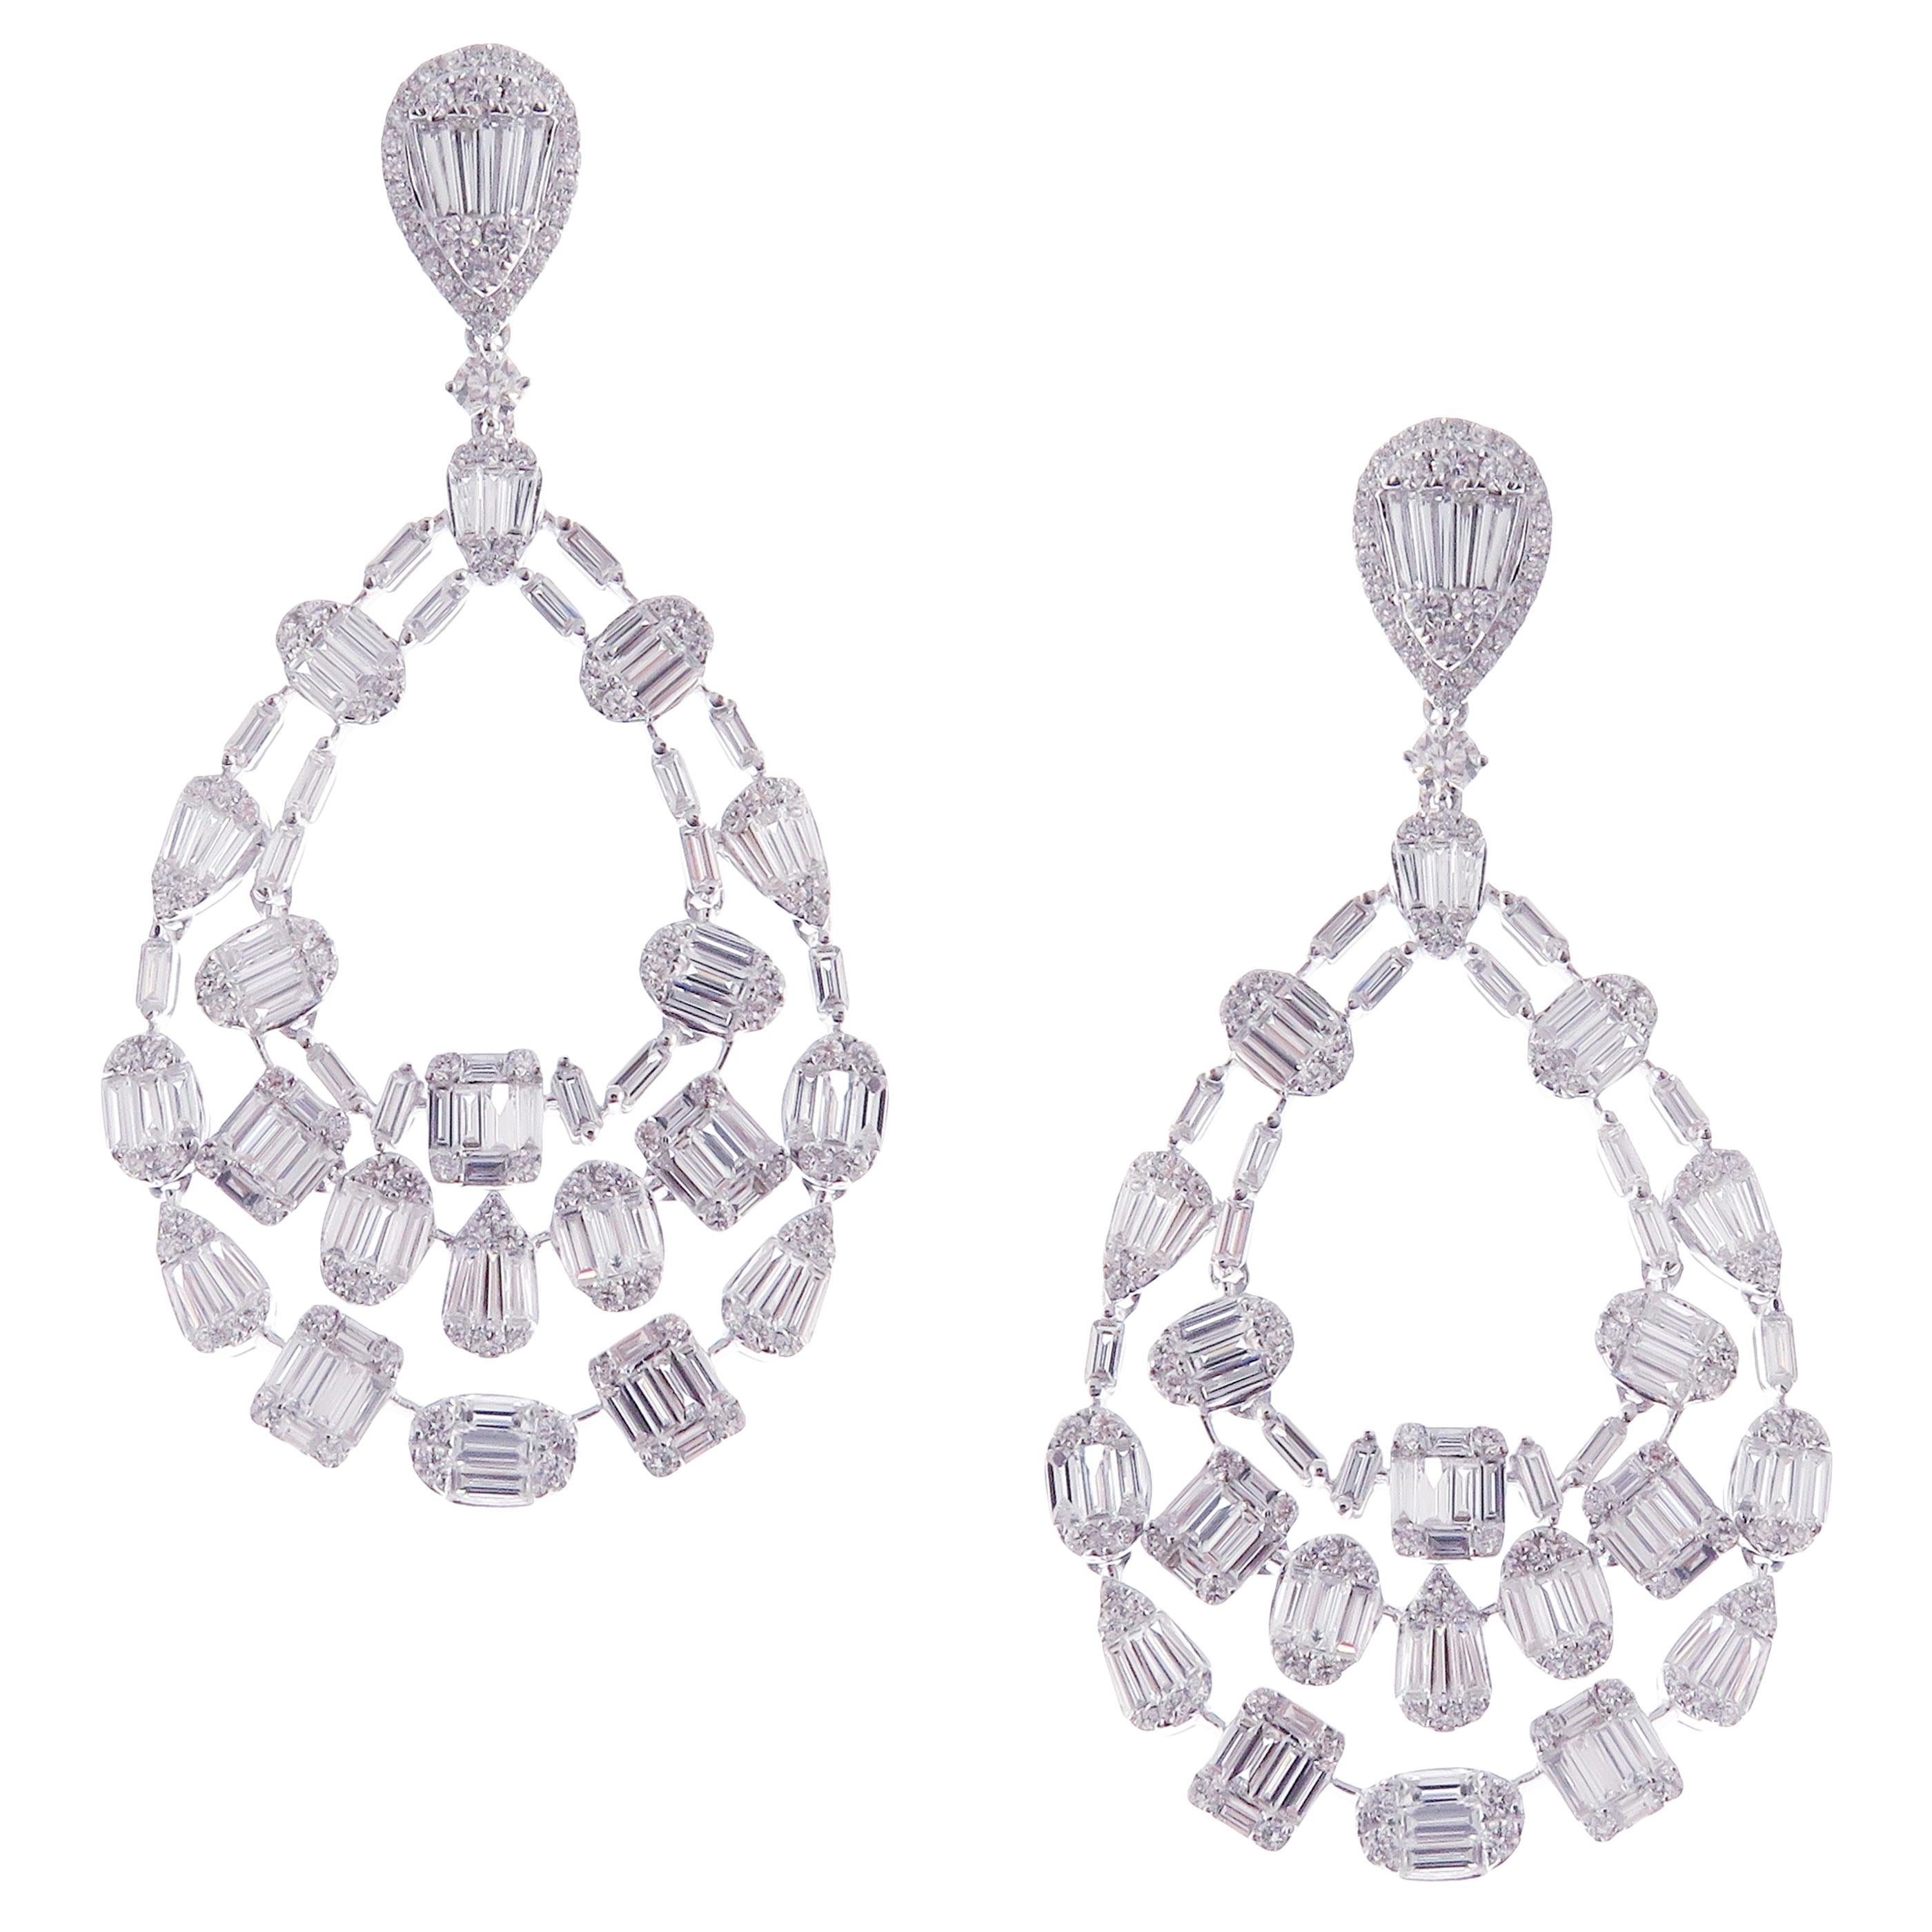 These elegant multi shapes dangling earrings with illusion setting round and baguette white diamonds are crafted in 18-karat white gold, featuring 250 round white diamonds totaling of 2.59 carats and 190 baguette white diamonds totaling of 6.43